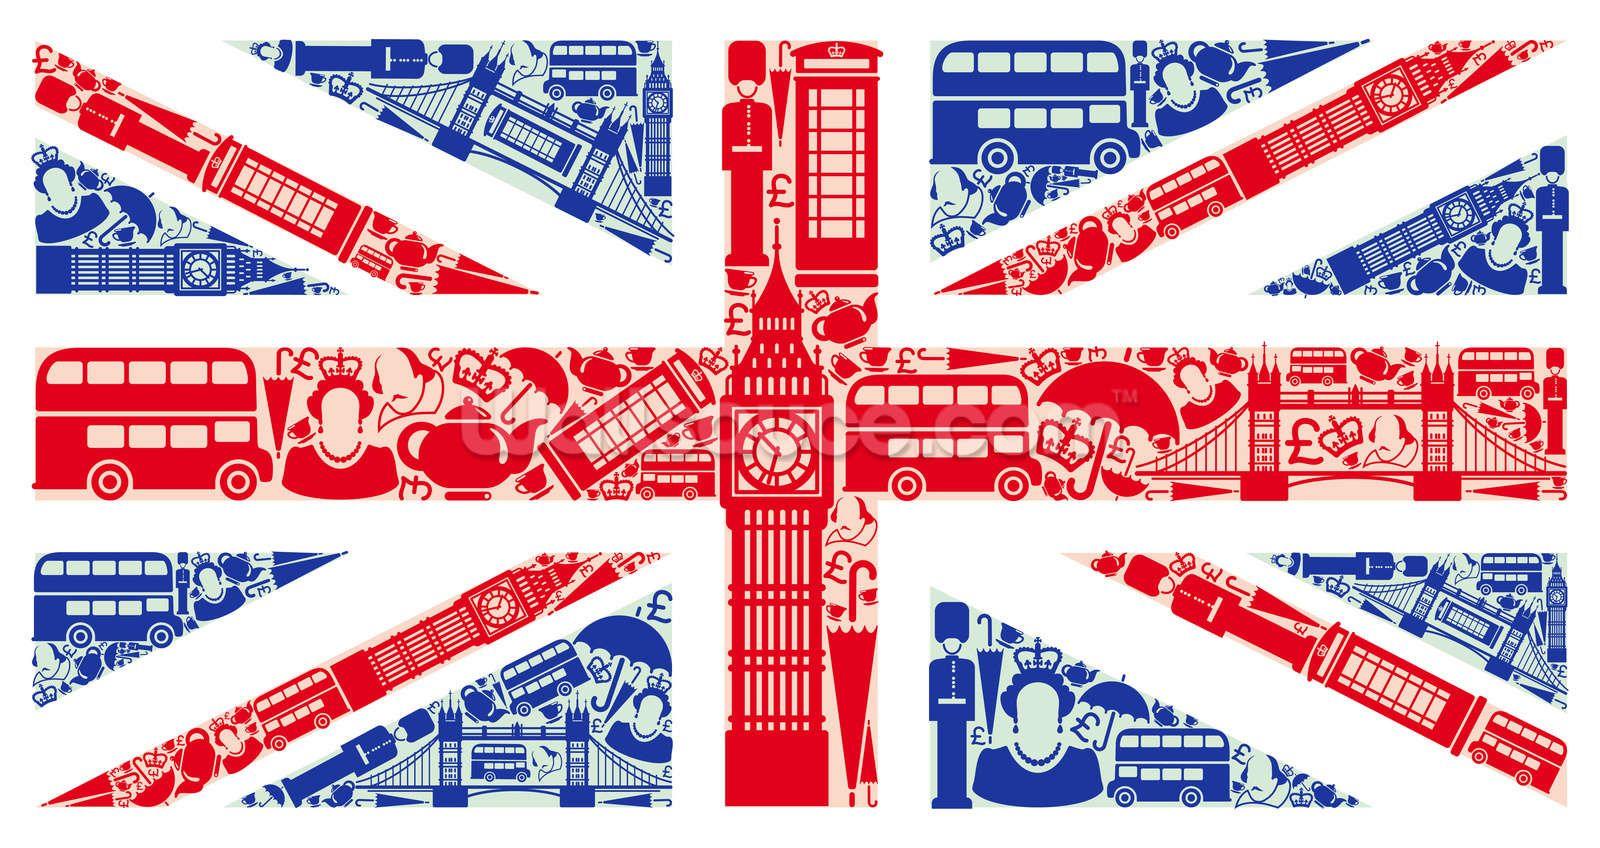 Union Jack Montage Wall Mural & Union Jack Montage Wallpaper